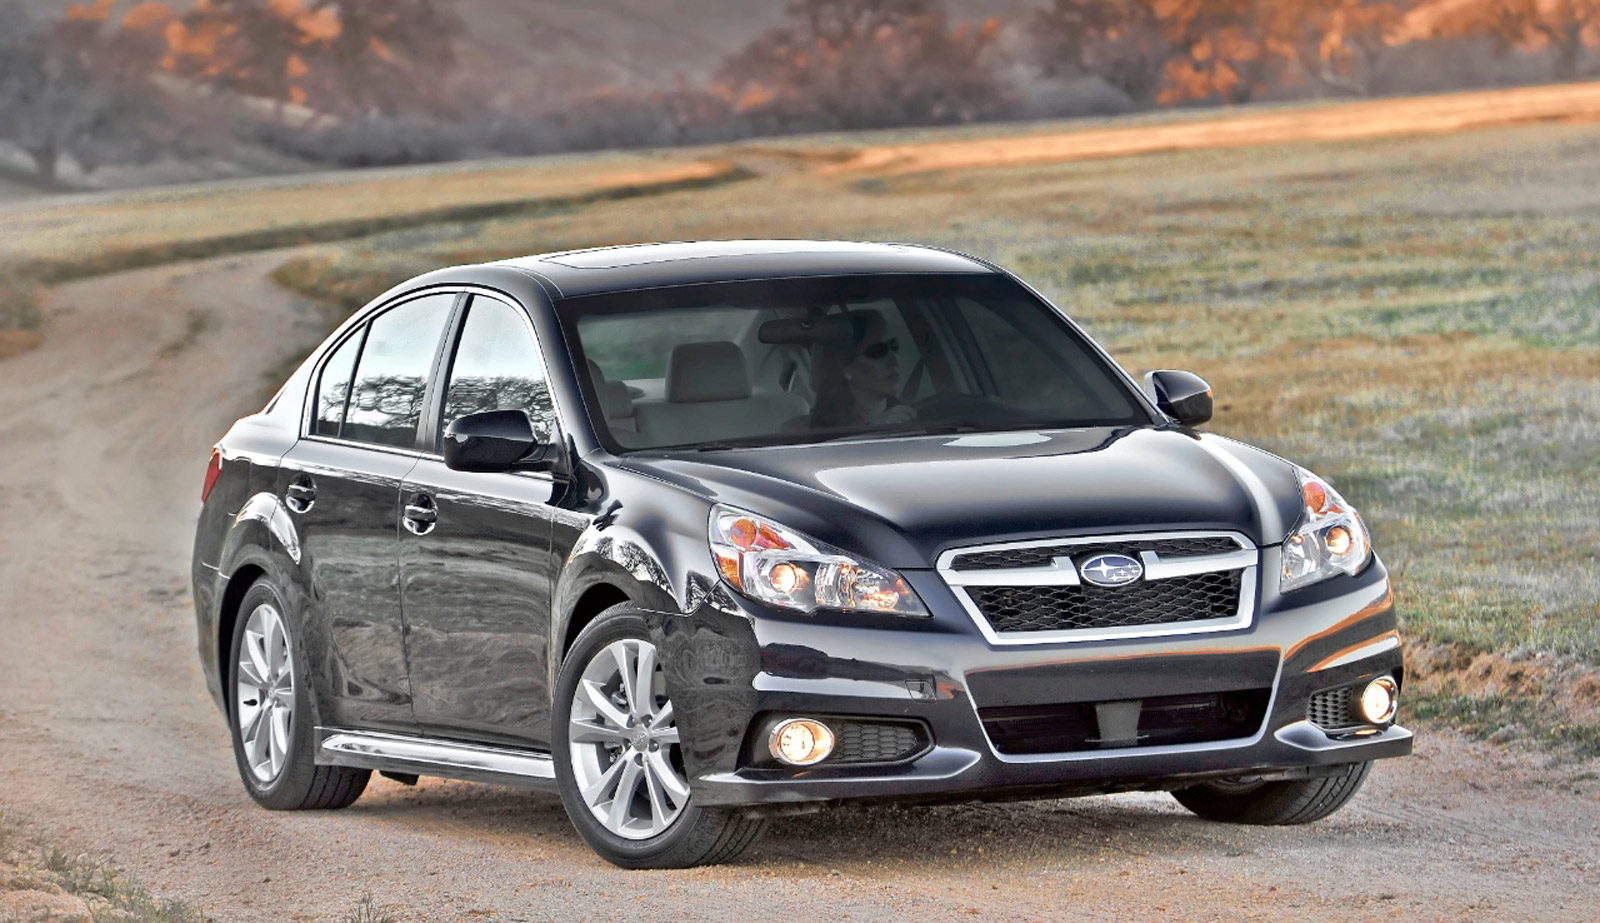 2013 Subaru Legacy Review, Ratings, Specs, Prices, and Photos - The Car